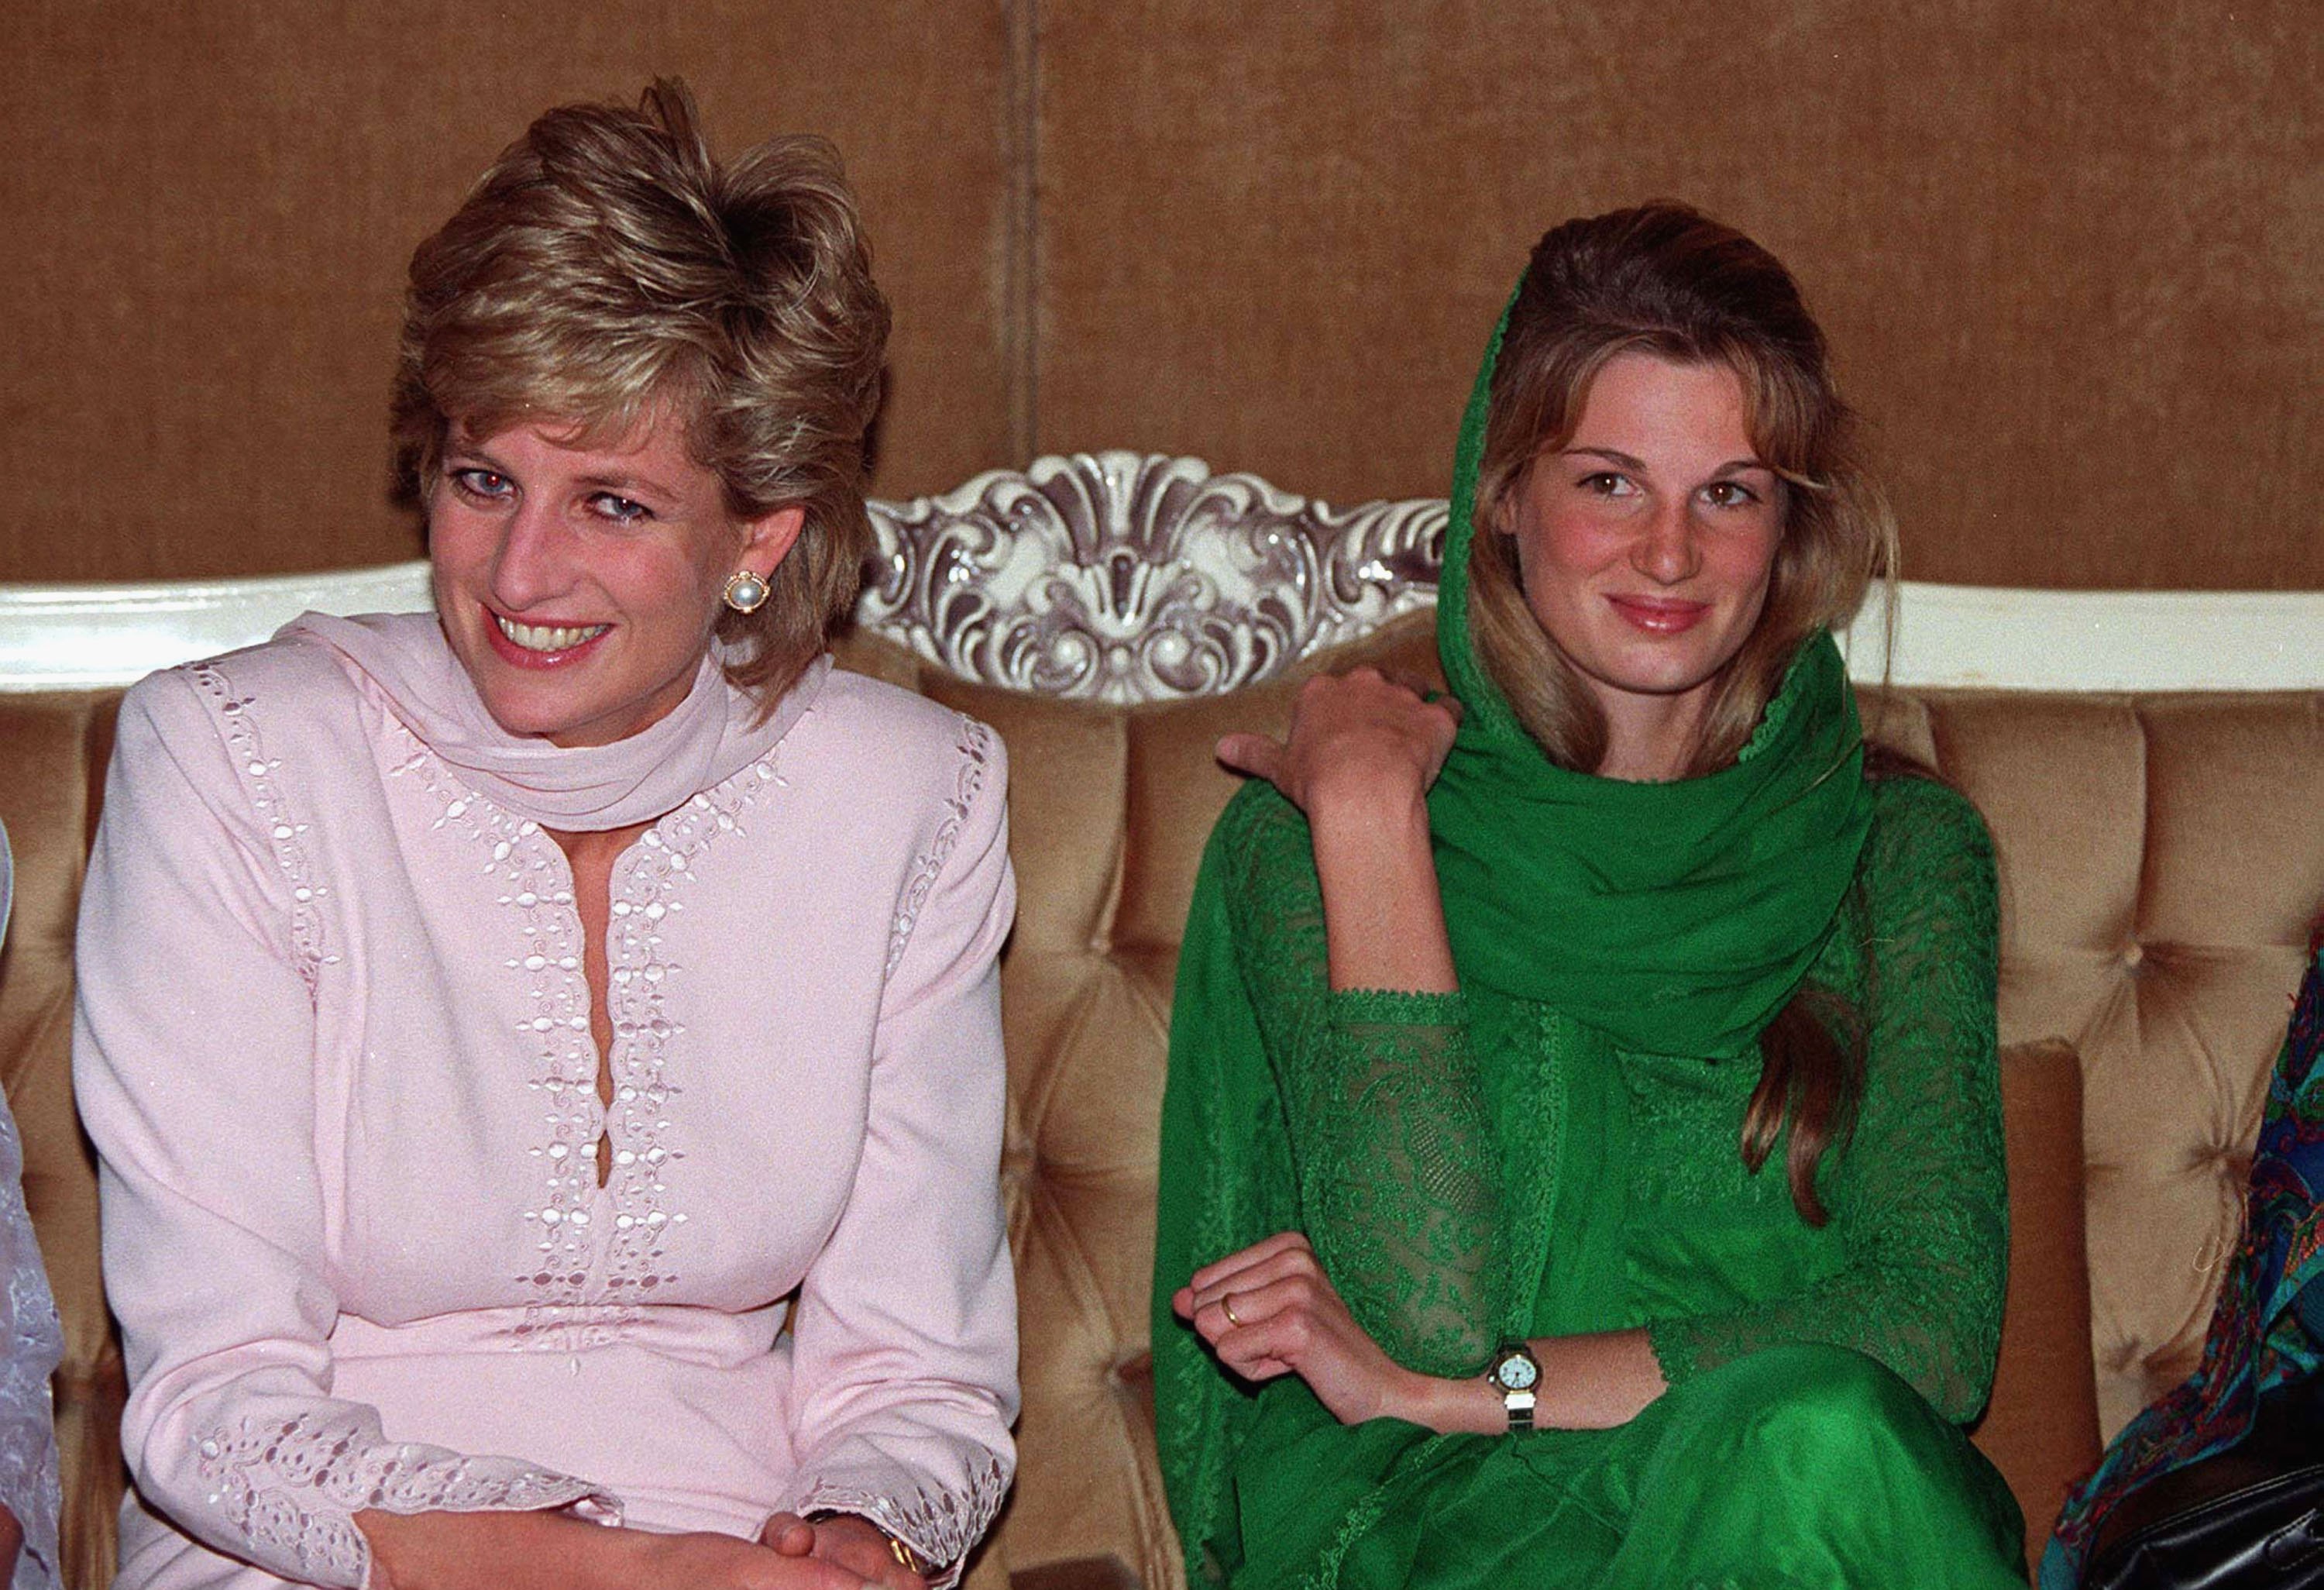 Princess Diana and Jemima Khan sitting together during the royal’s trip to Lahore, Pakistan